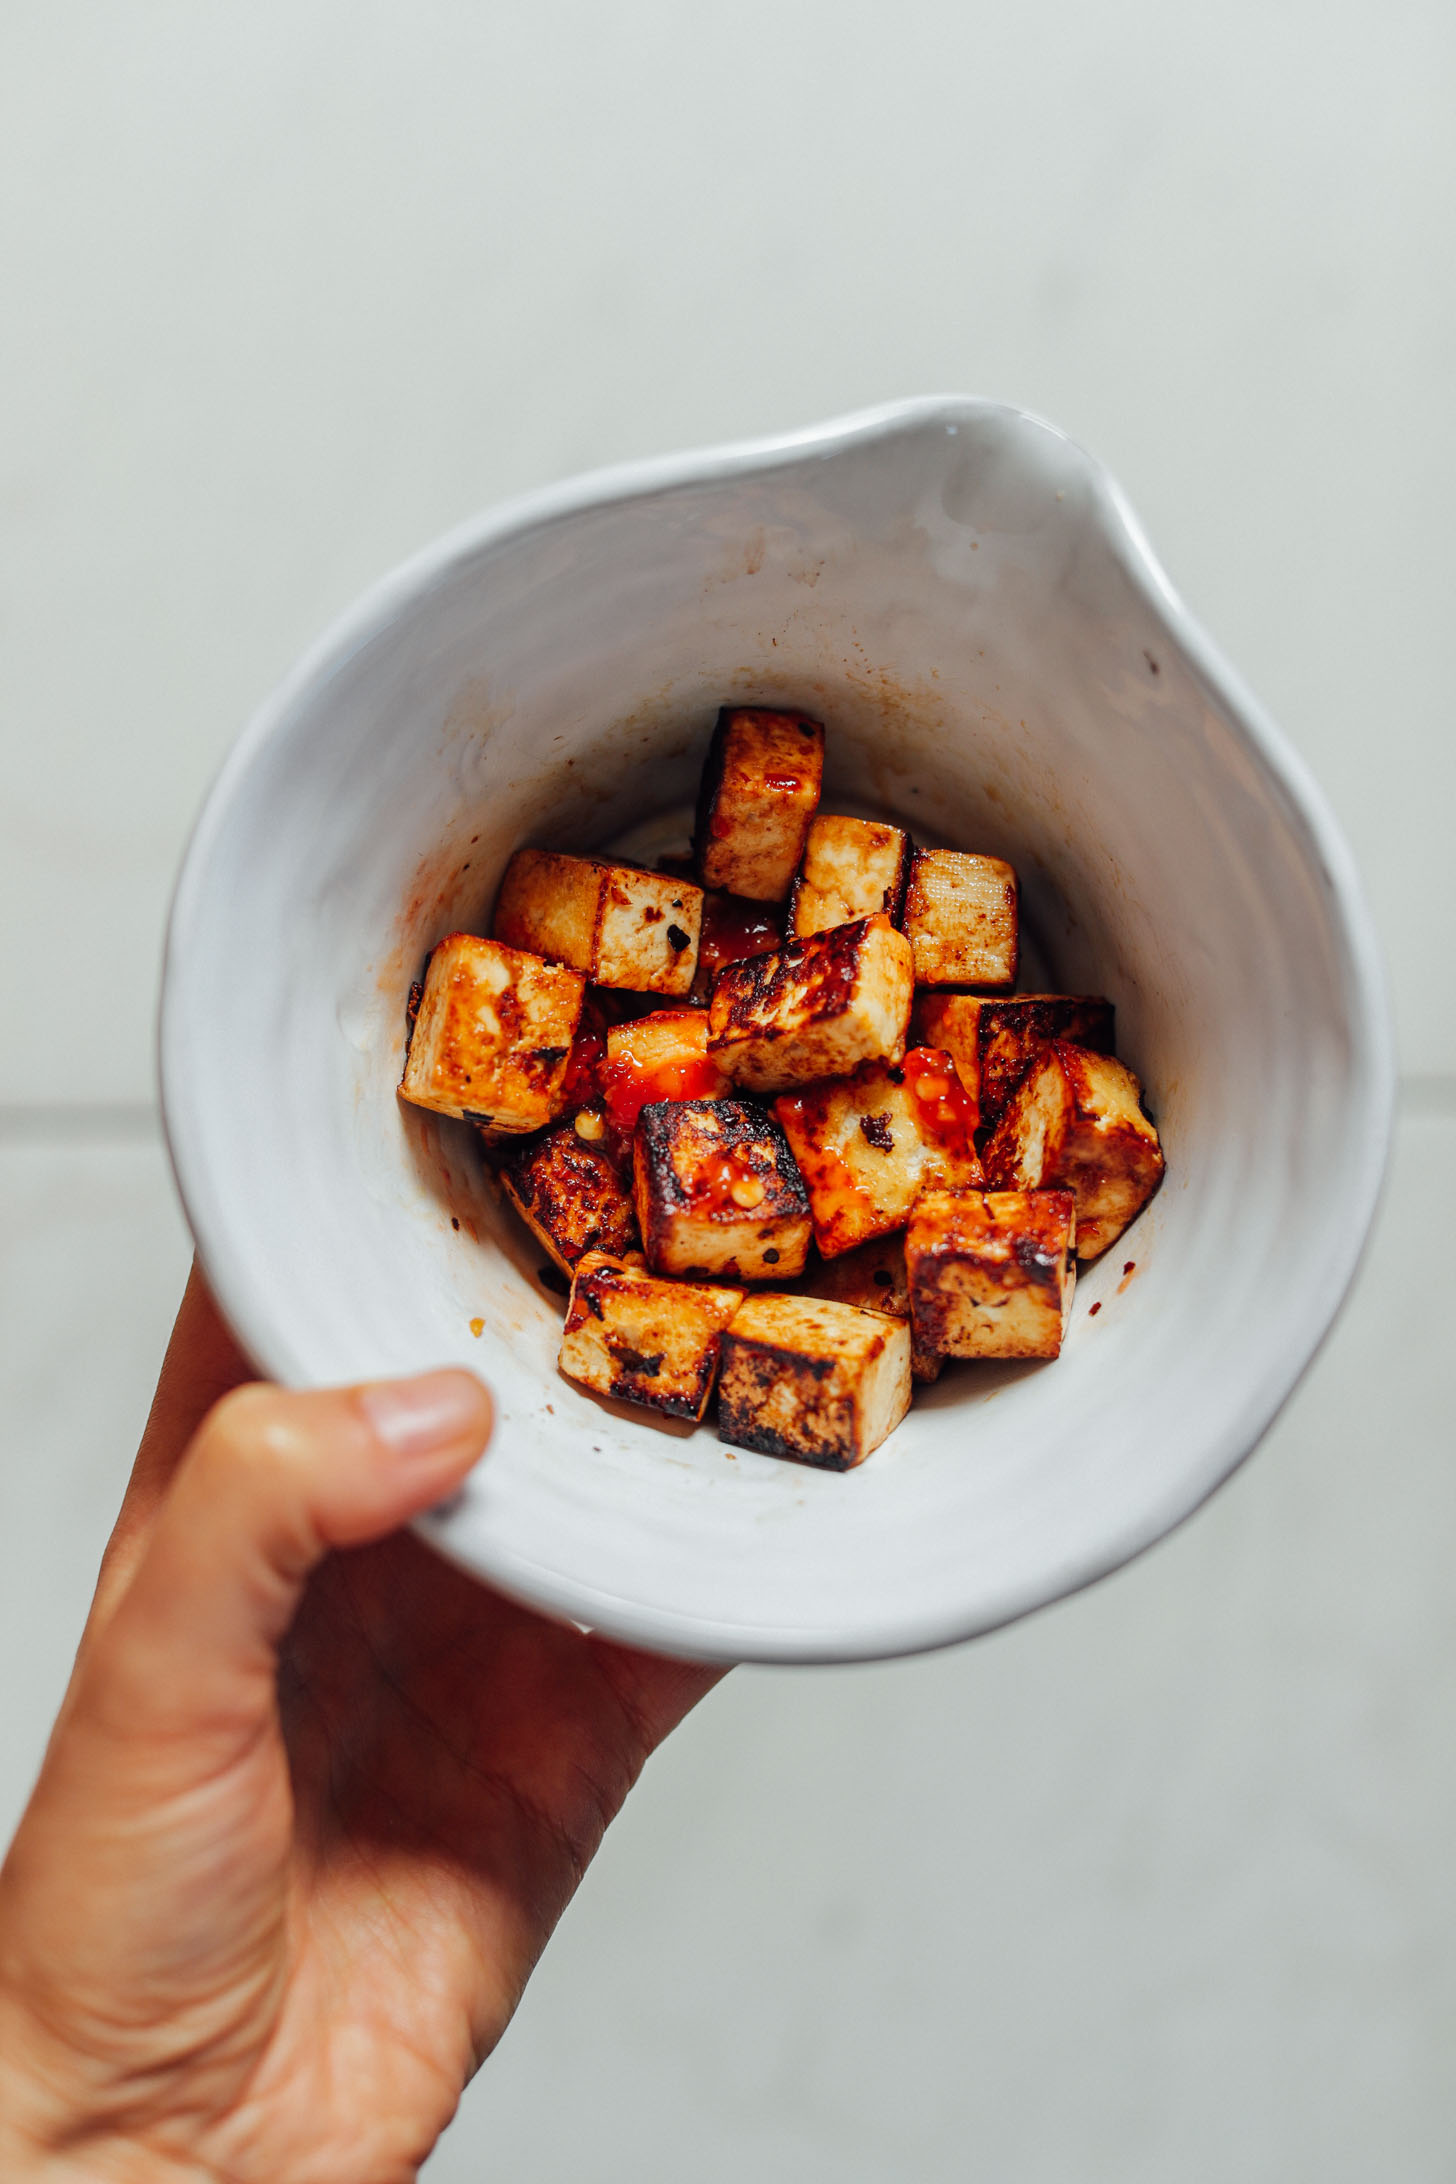 A bowl of cooked tofu for adding to our delicious plant-based meal